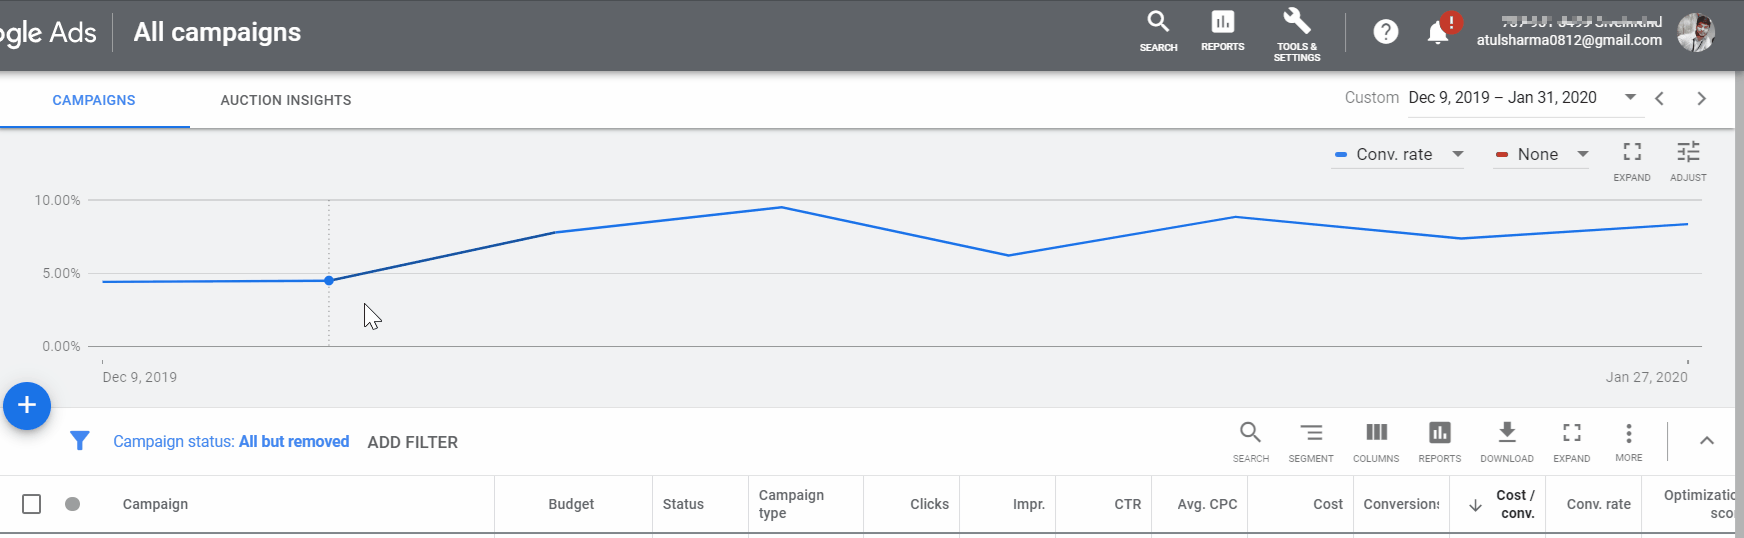 Increased Google Ads Account Conversion Rate by ~100%